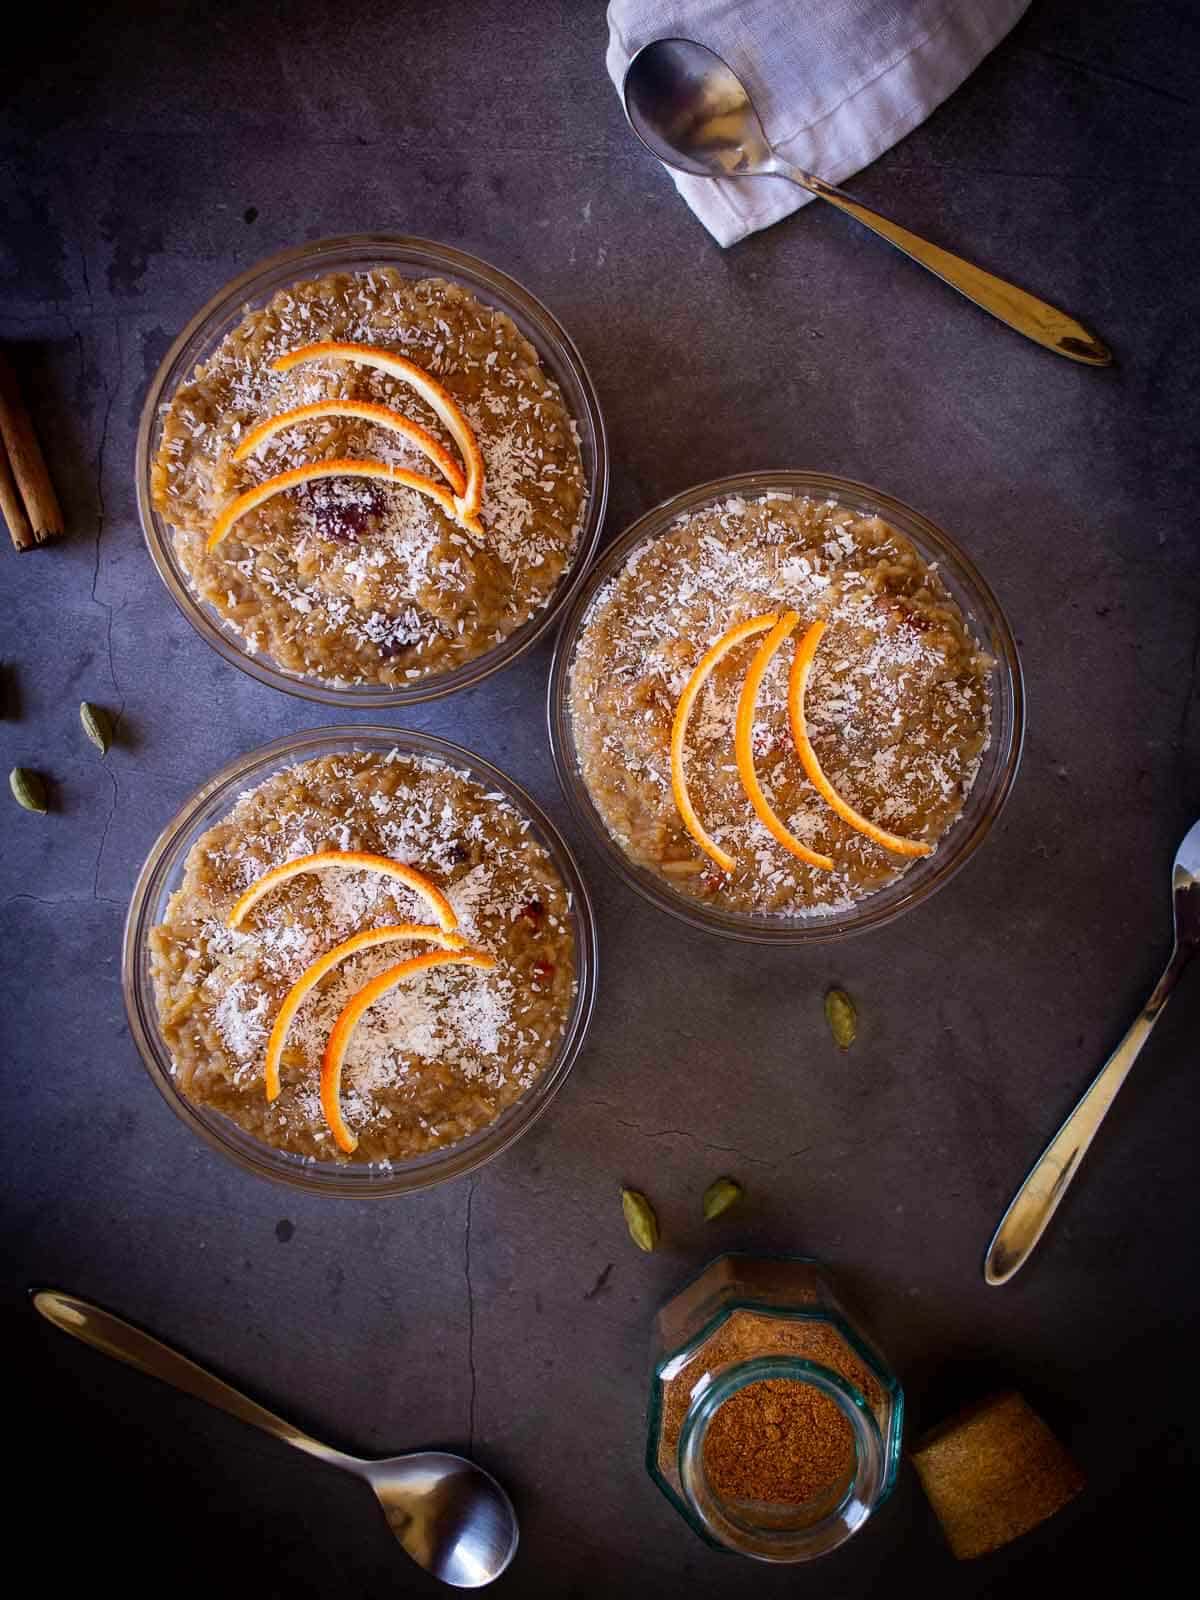 cardamom rice puddings in a table with cardamom pods.